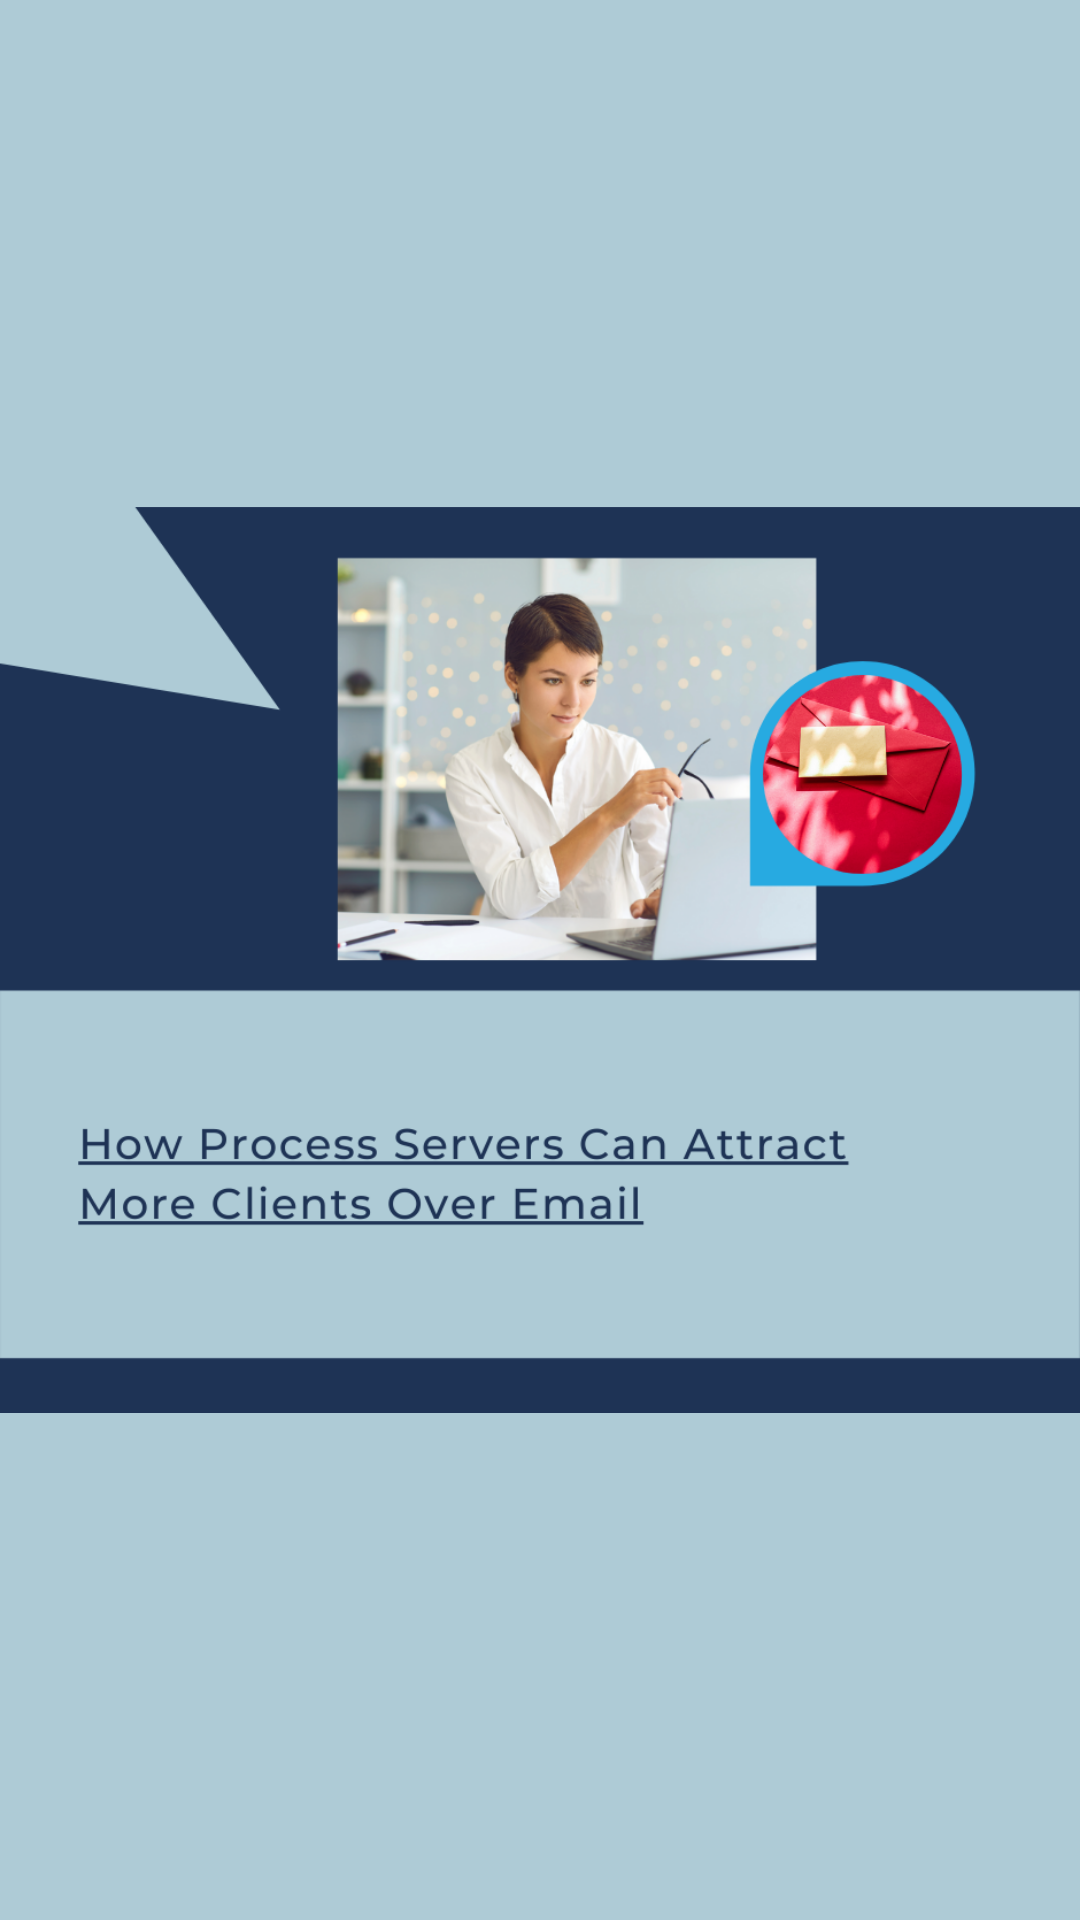 Process Server attract more clients over email